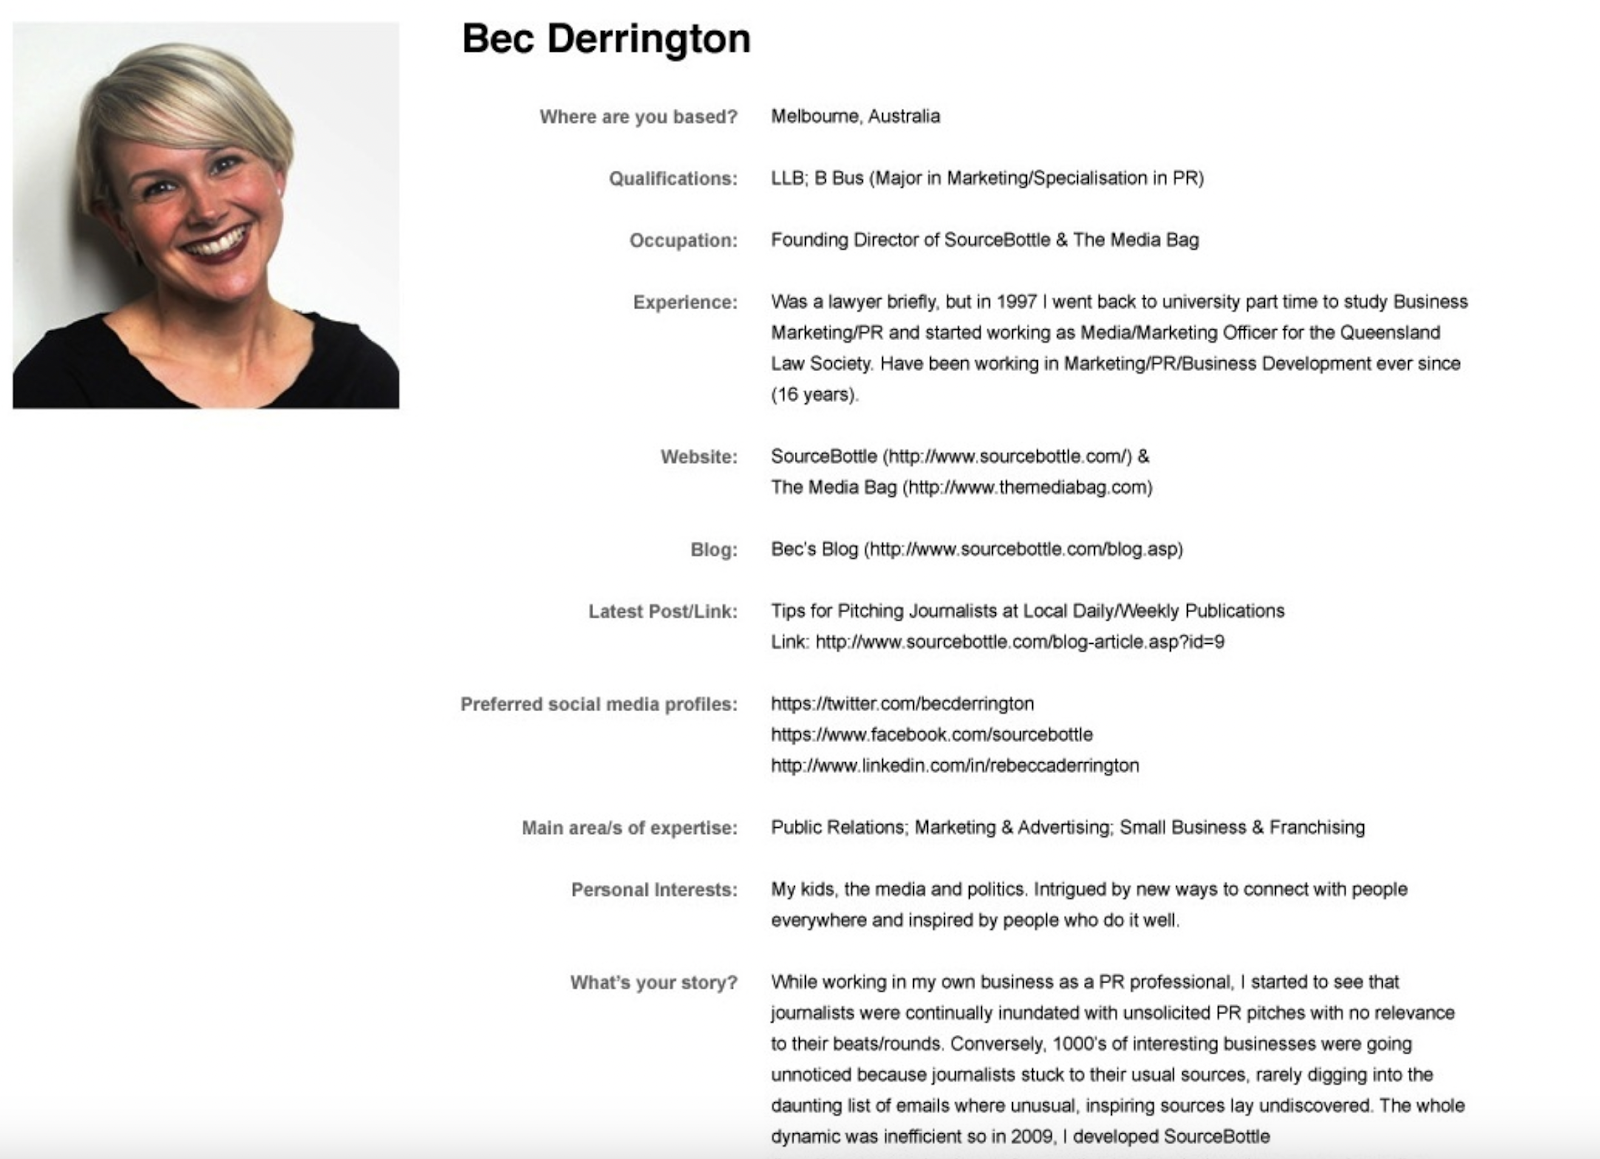 A professional profile from SourceBottle with a portrait on the left and detailed textual information on the right.